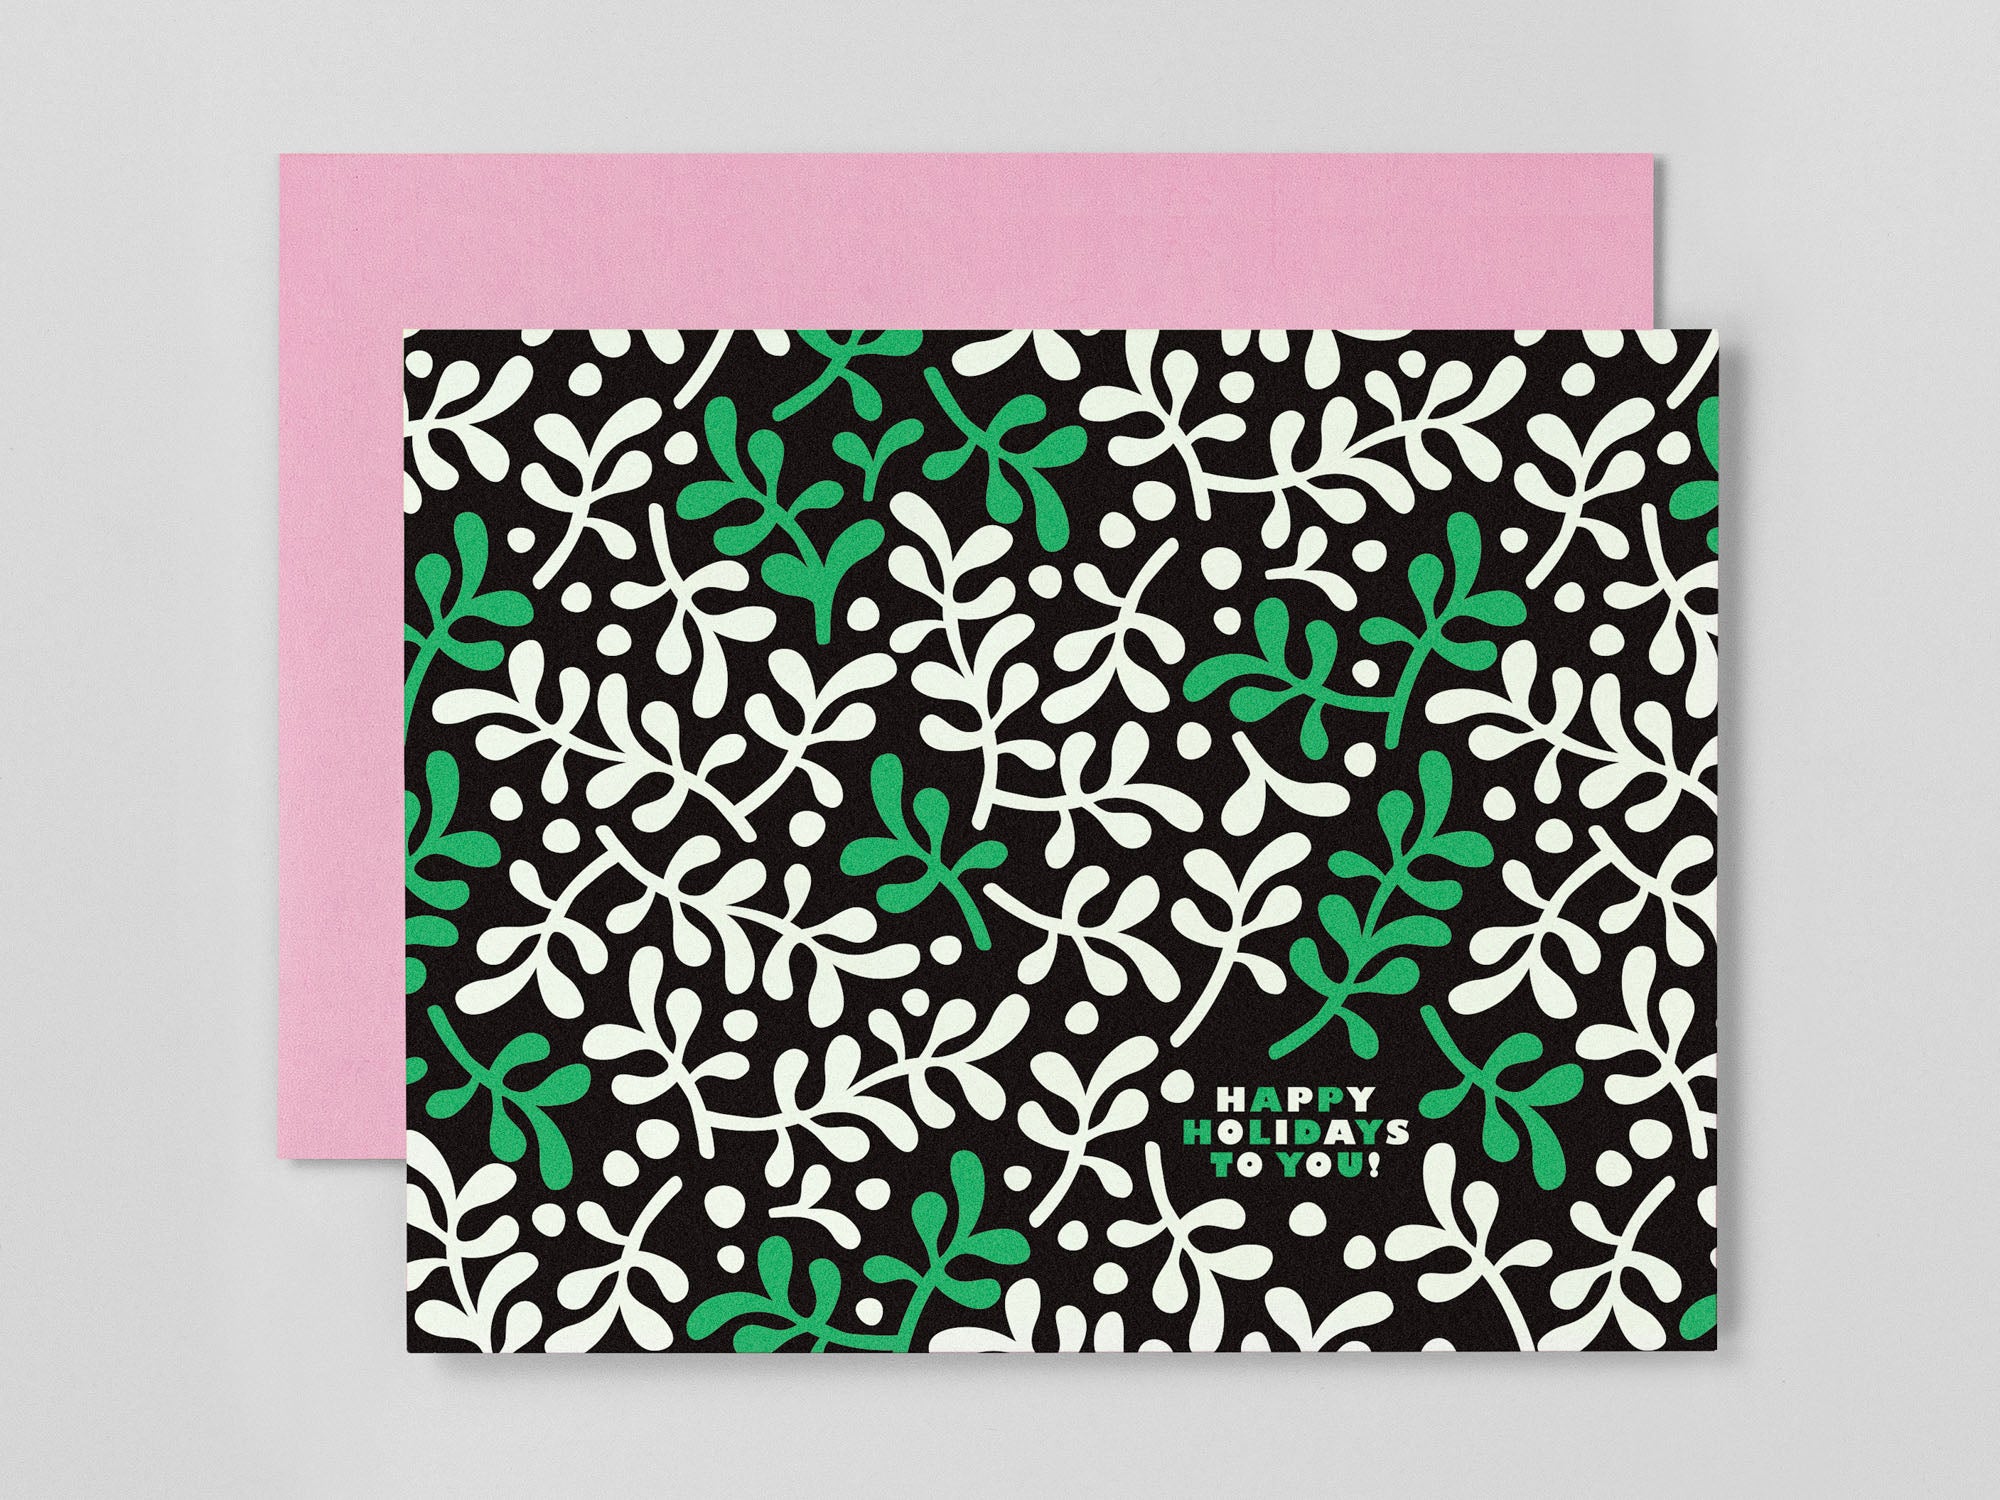 Happy Holidays To You abstract mistletoe pattern holiday card or Christmas card. Designed by @mydarlin_bk